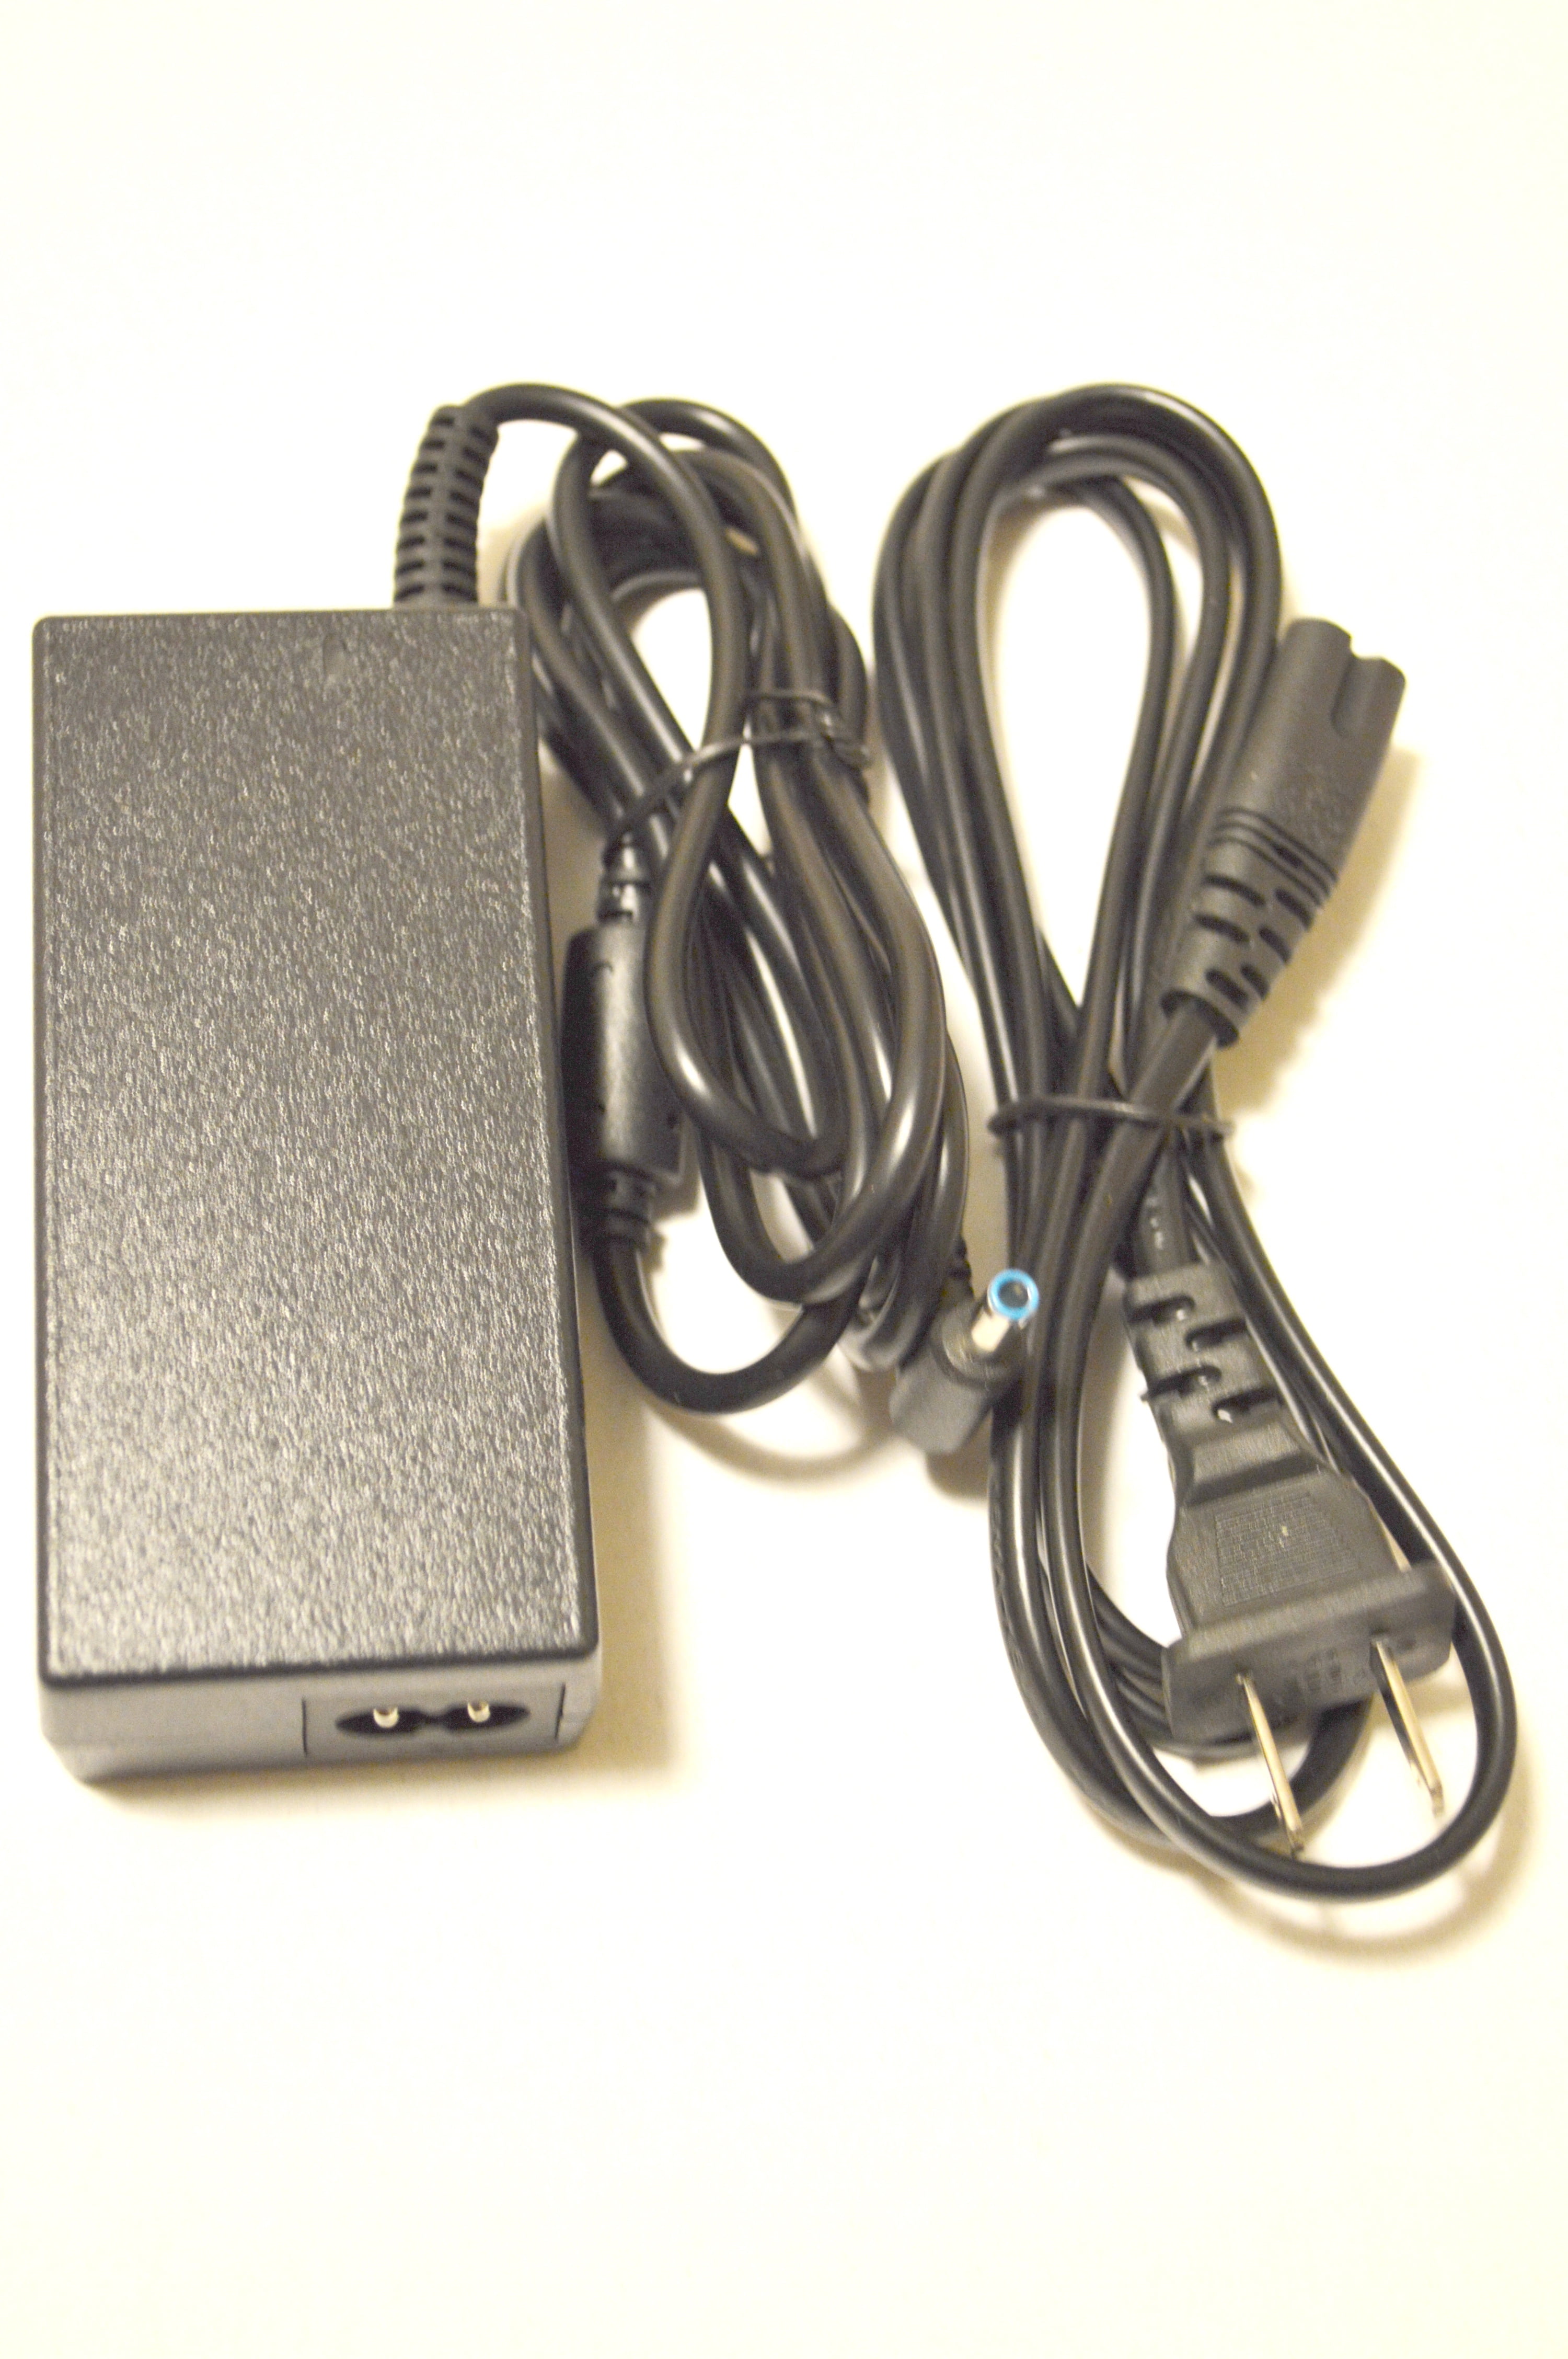 hp beats special edition laptop charger